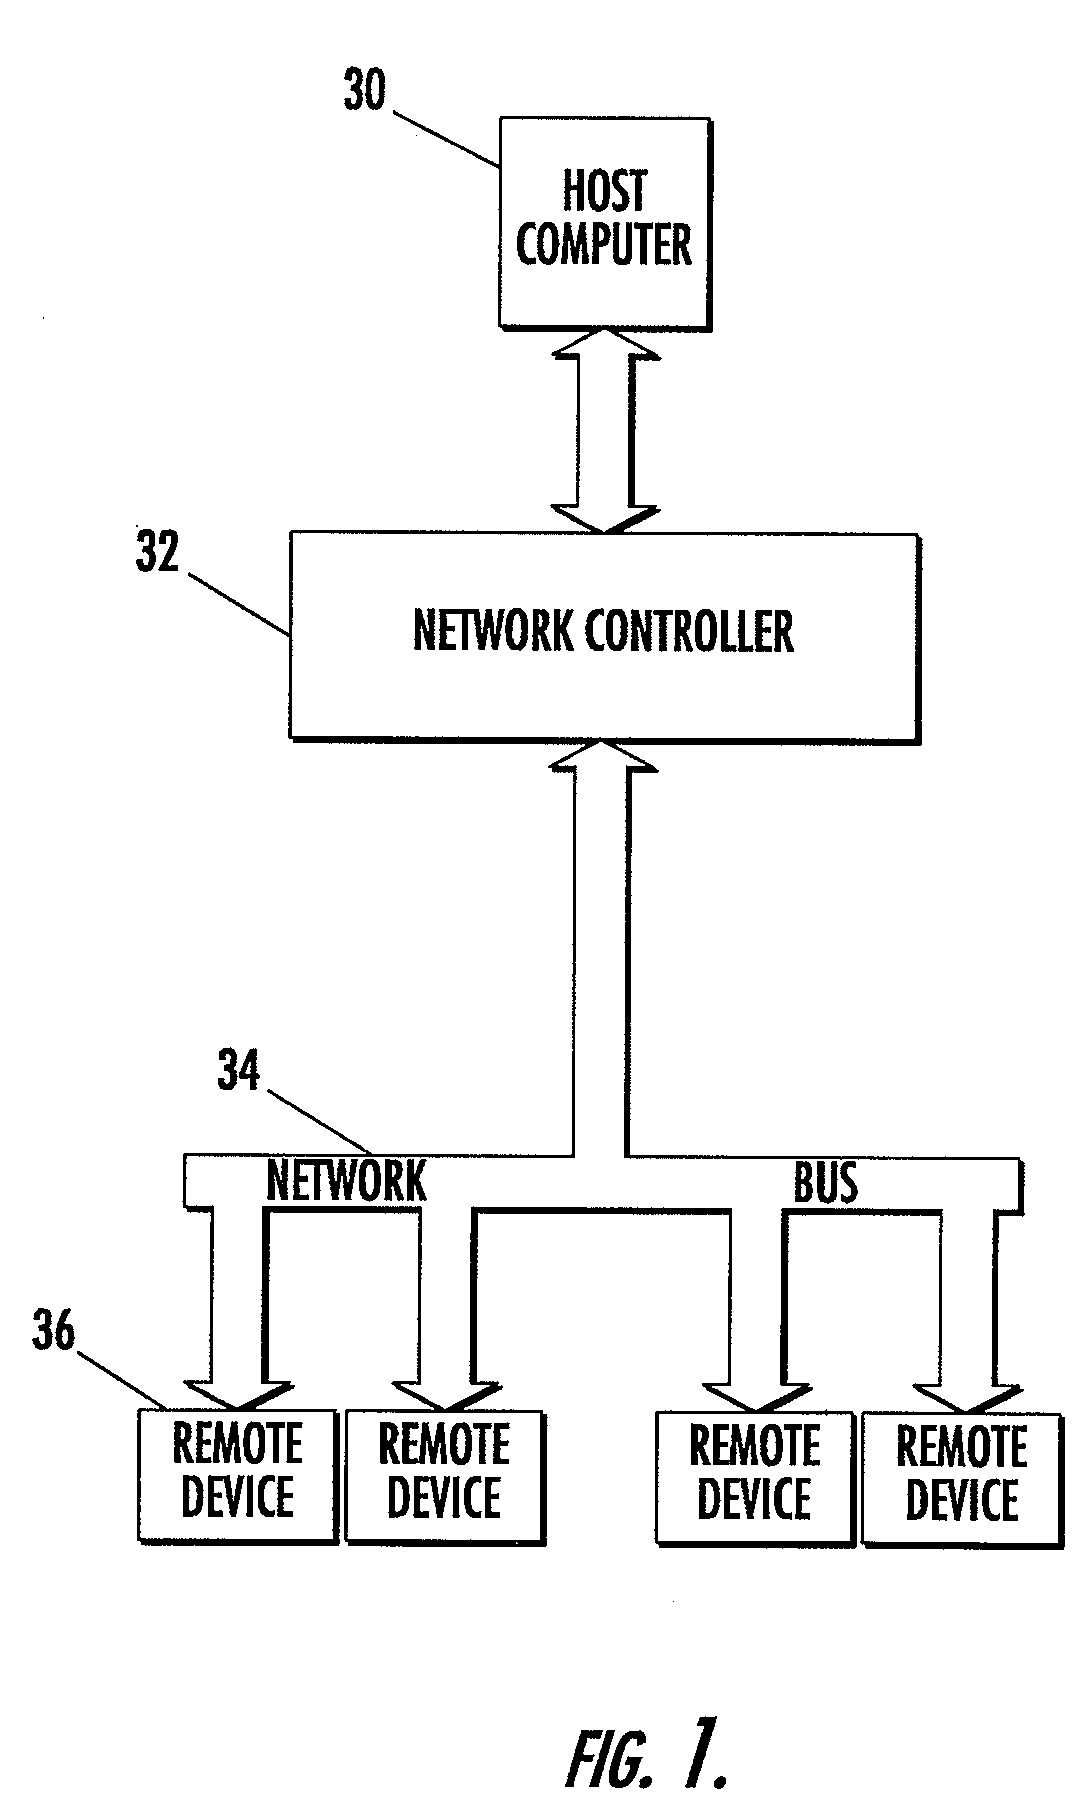 Network controller for digitally controlling remote devices via a common bus